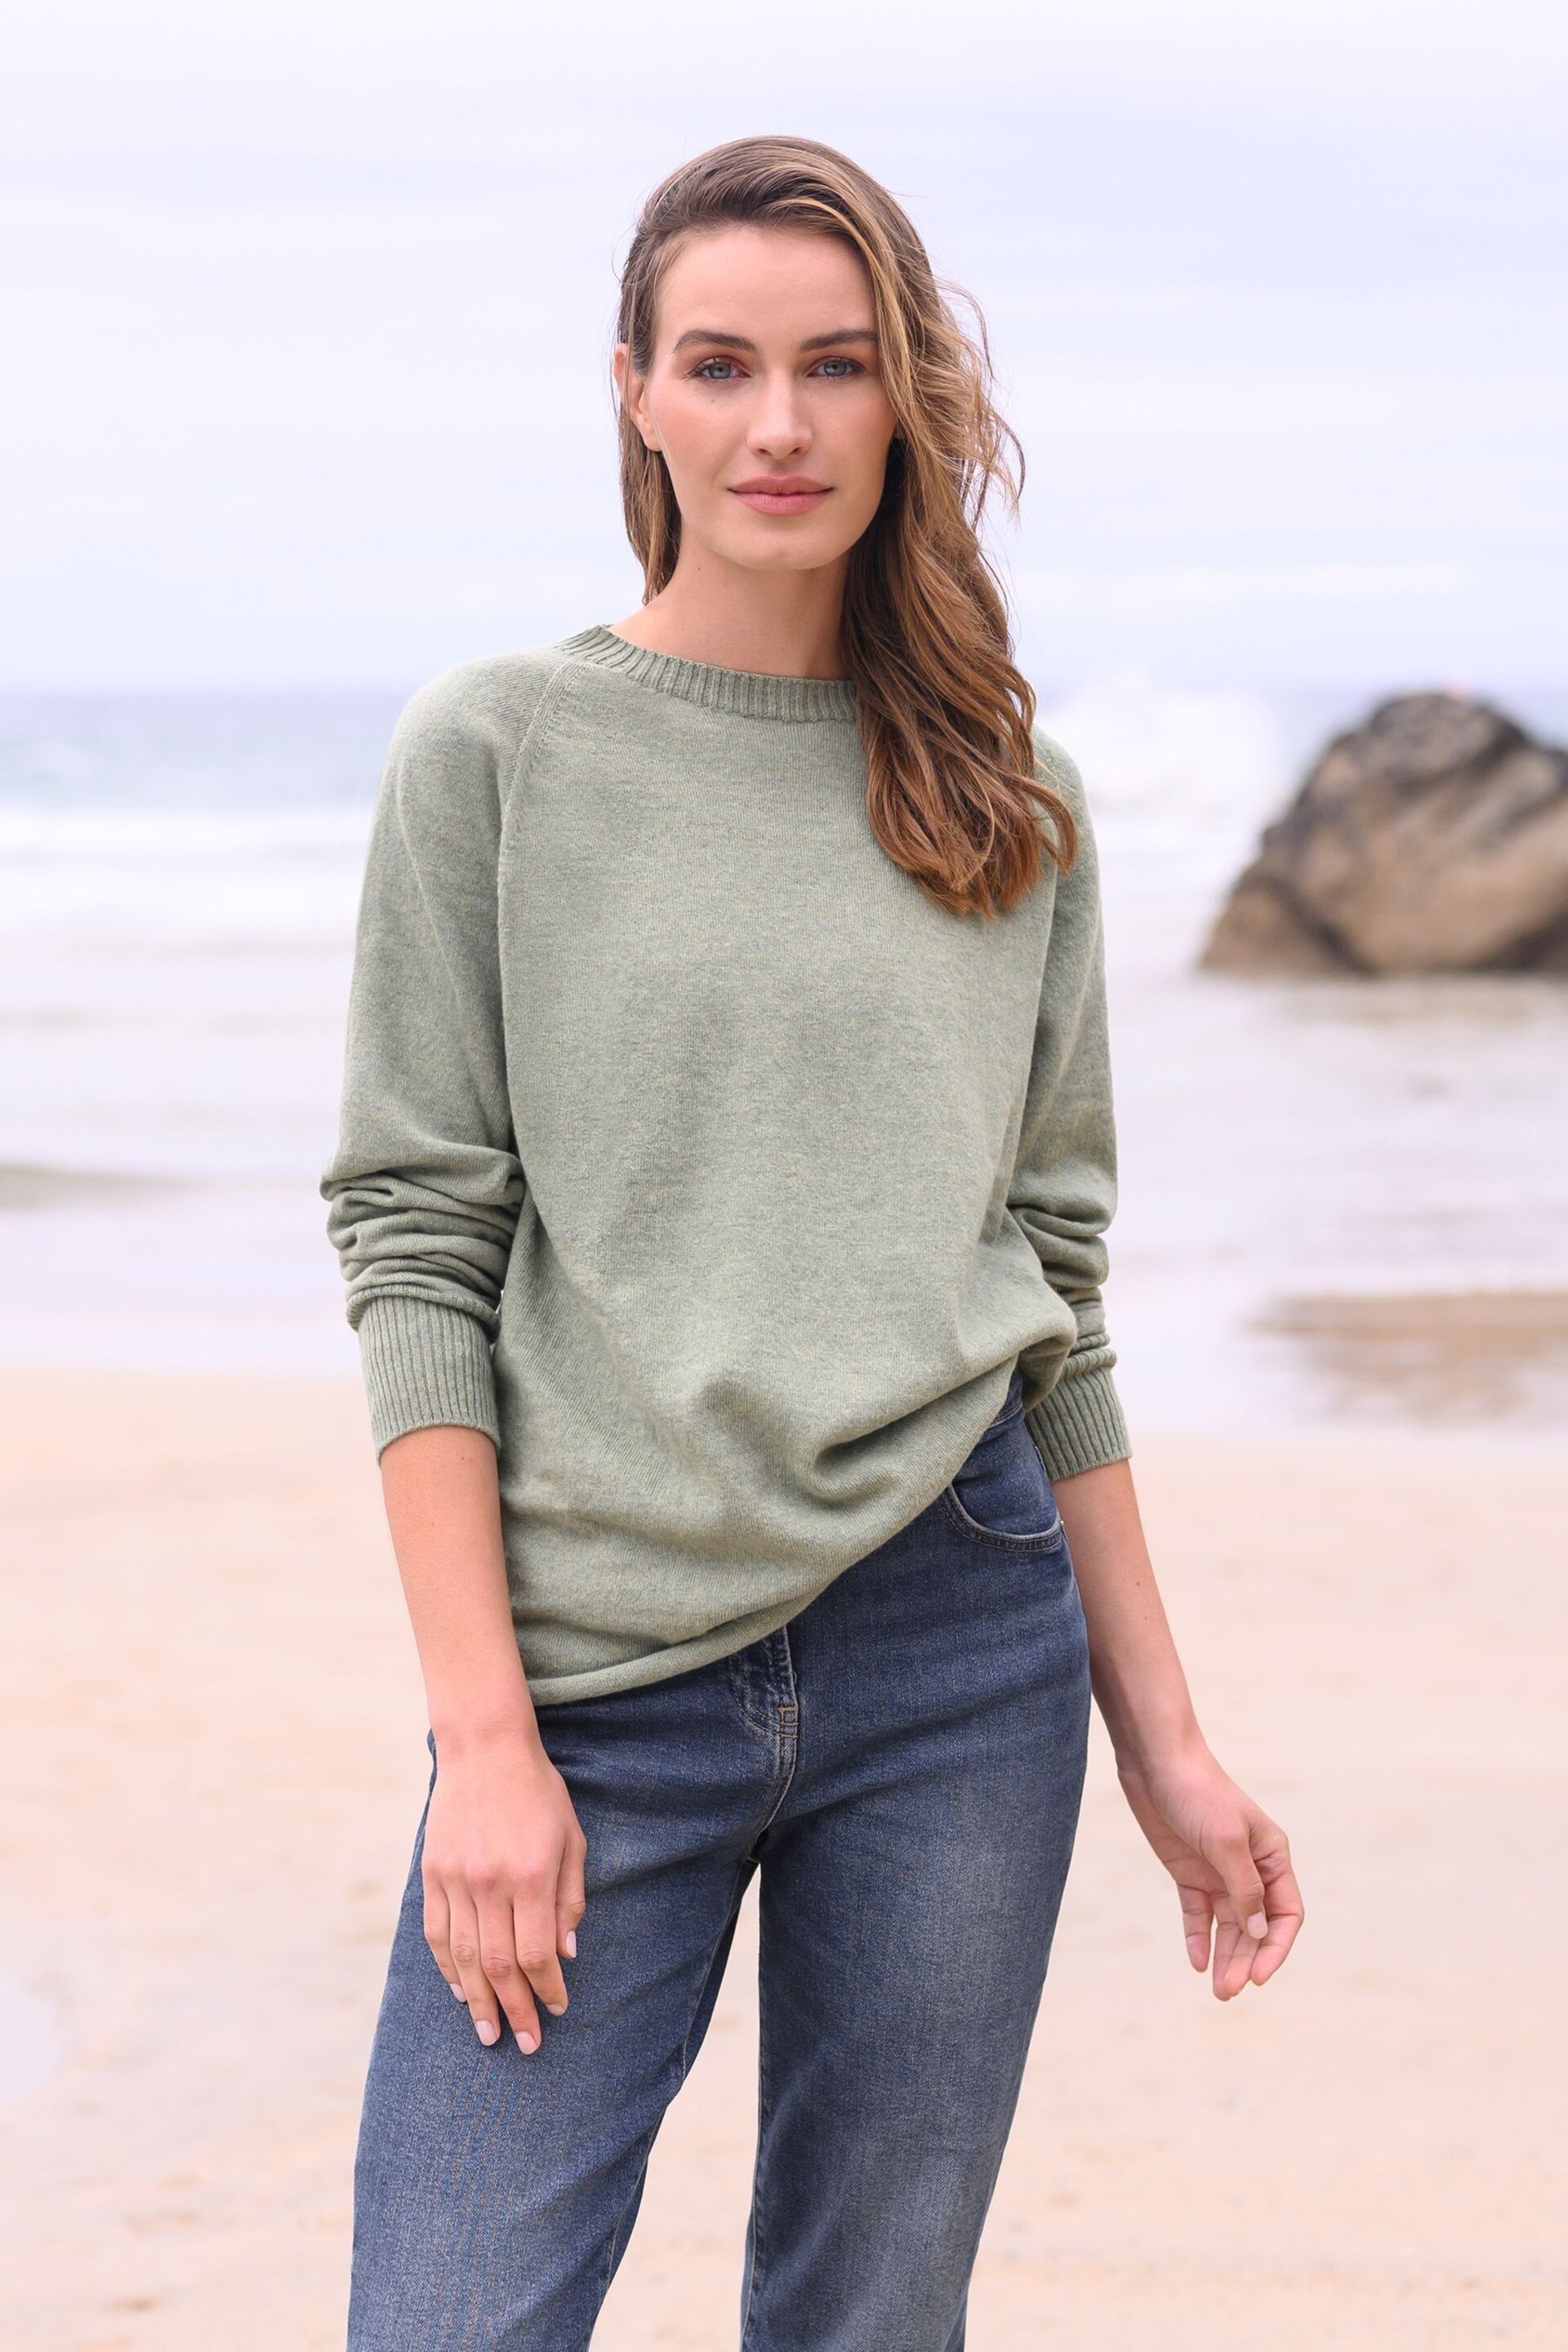 Celtic & Co. Green Geelong Slouch Crew Jumper - Image 1 of 5